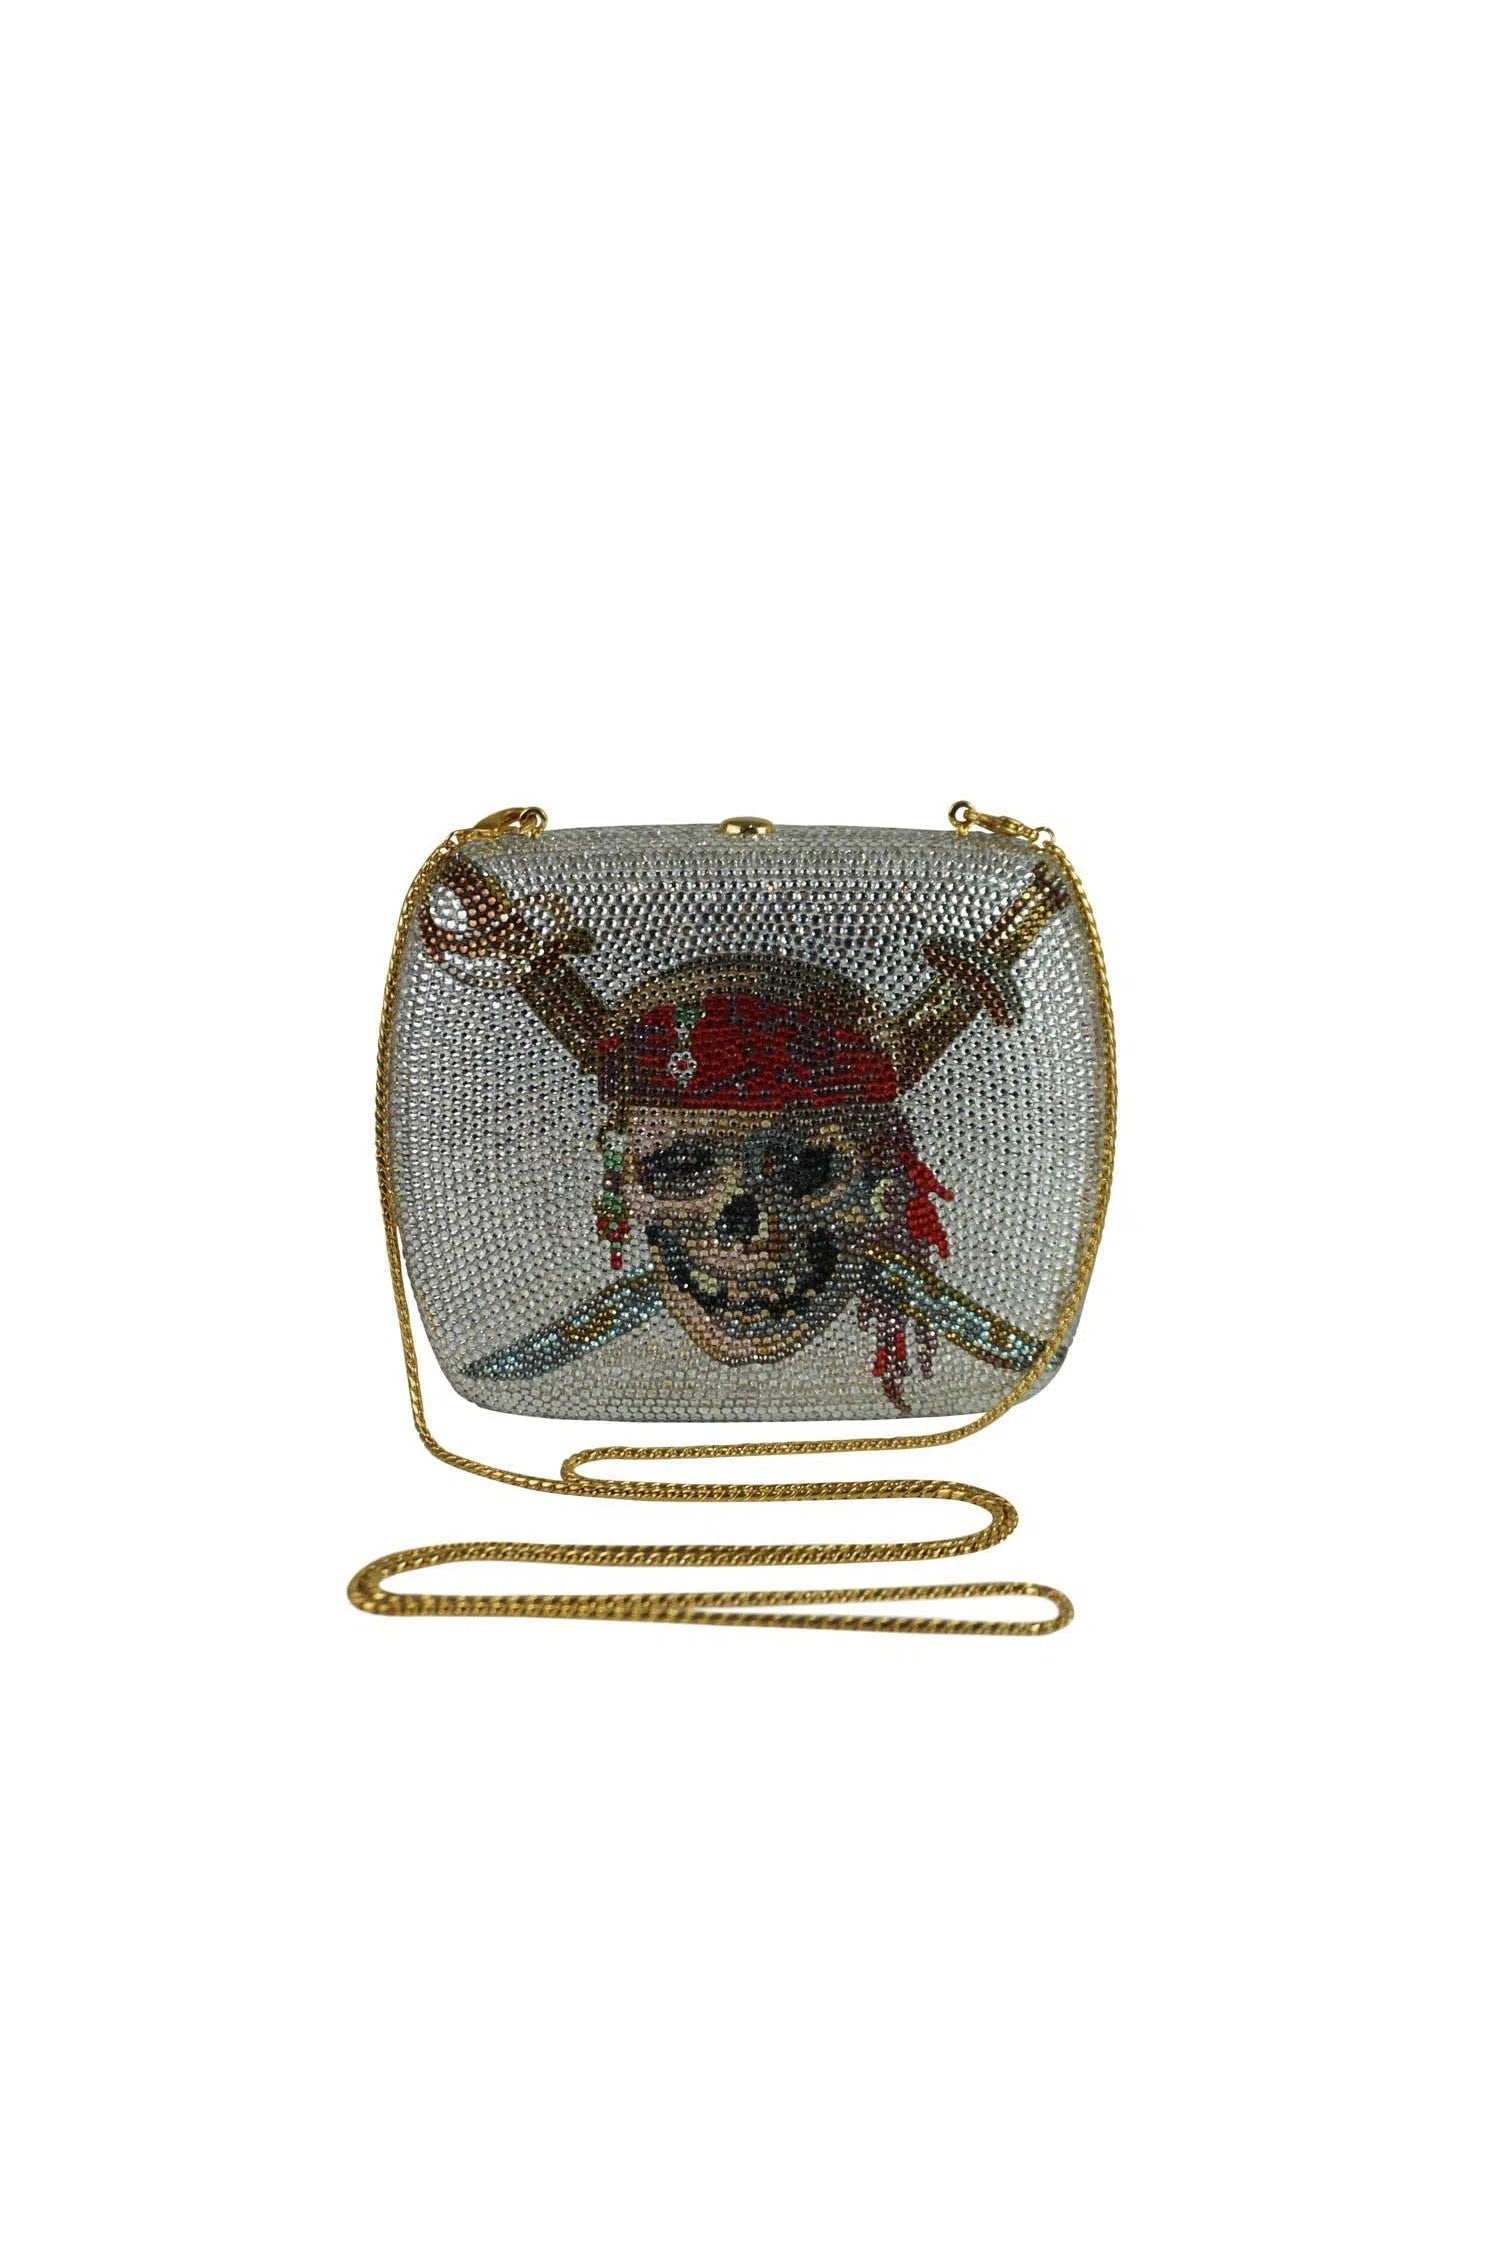 Judith Leiber "Dead Man's Chest" Pirates of the Caribbean Crystal Minaudiere